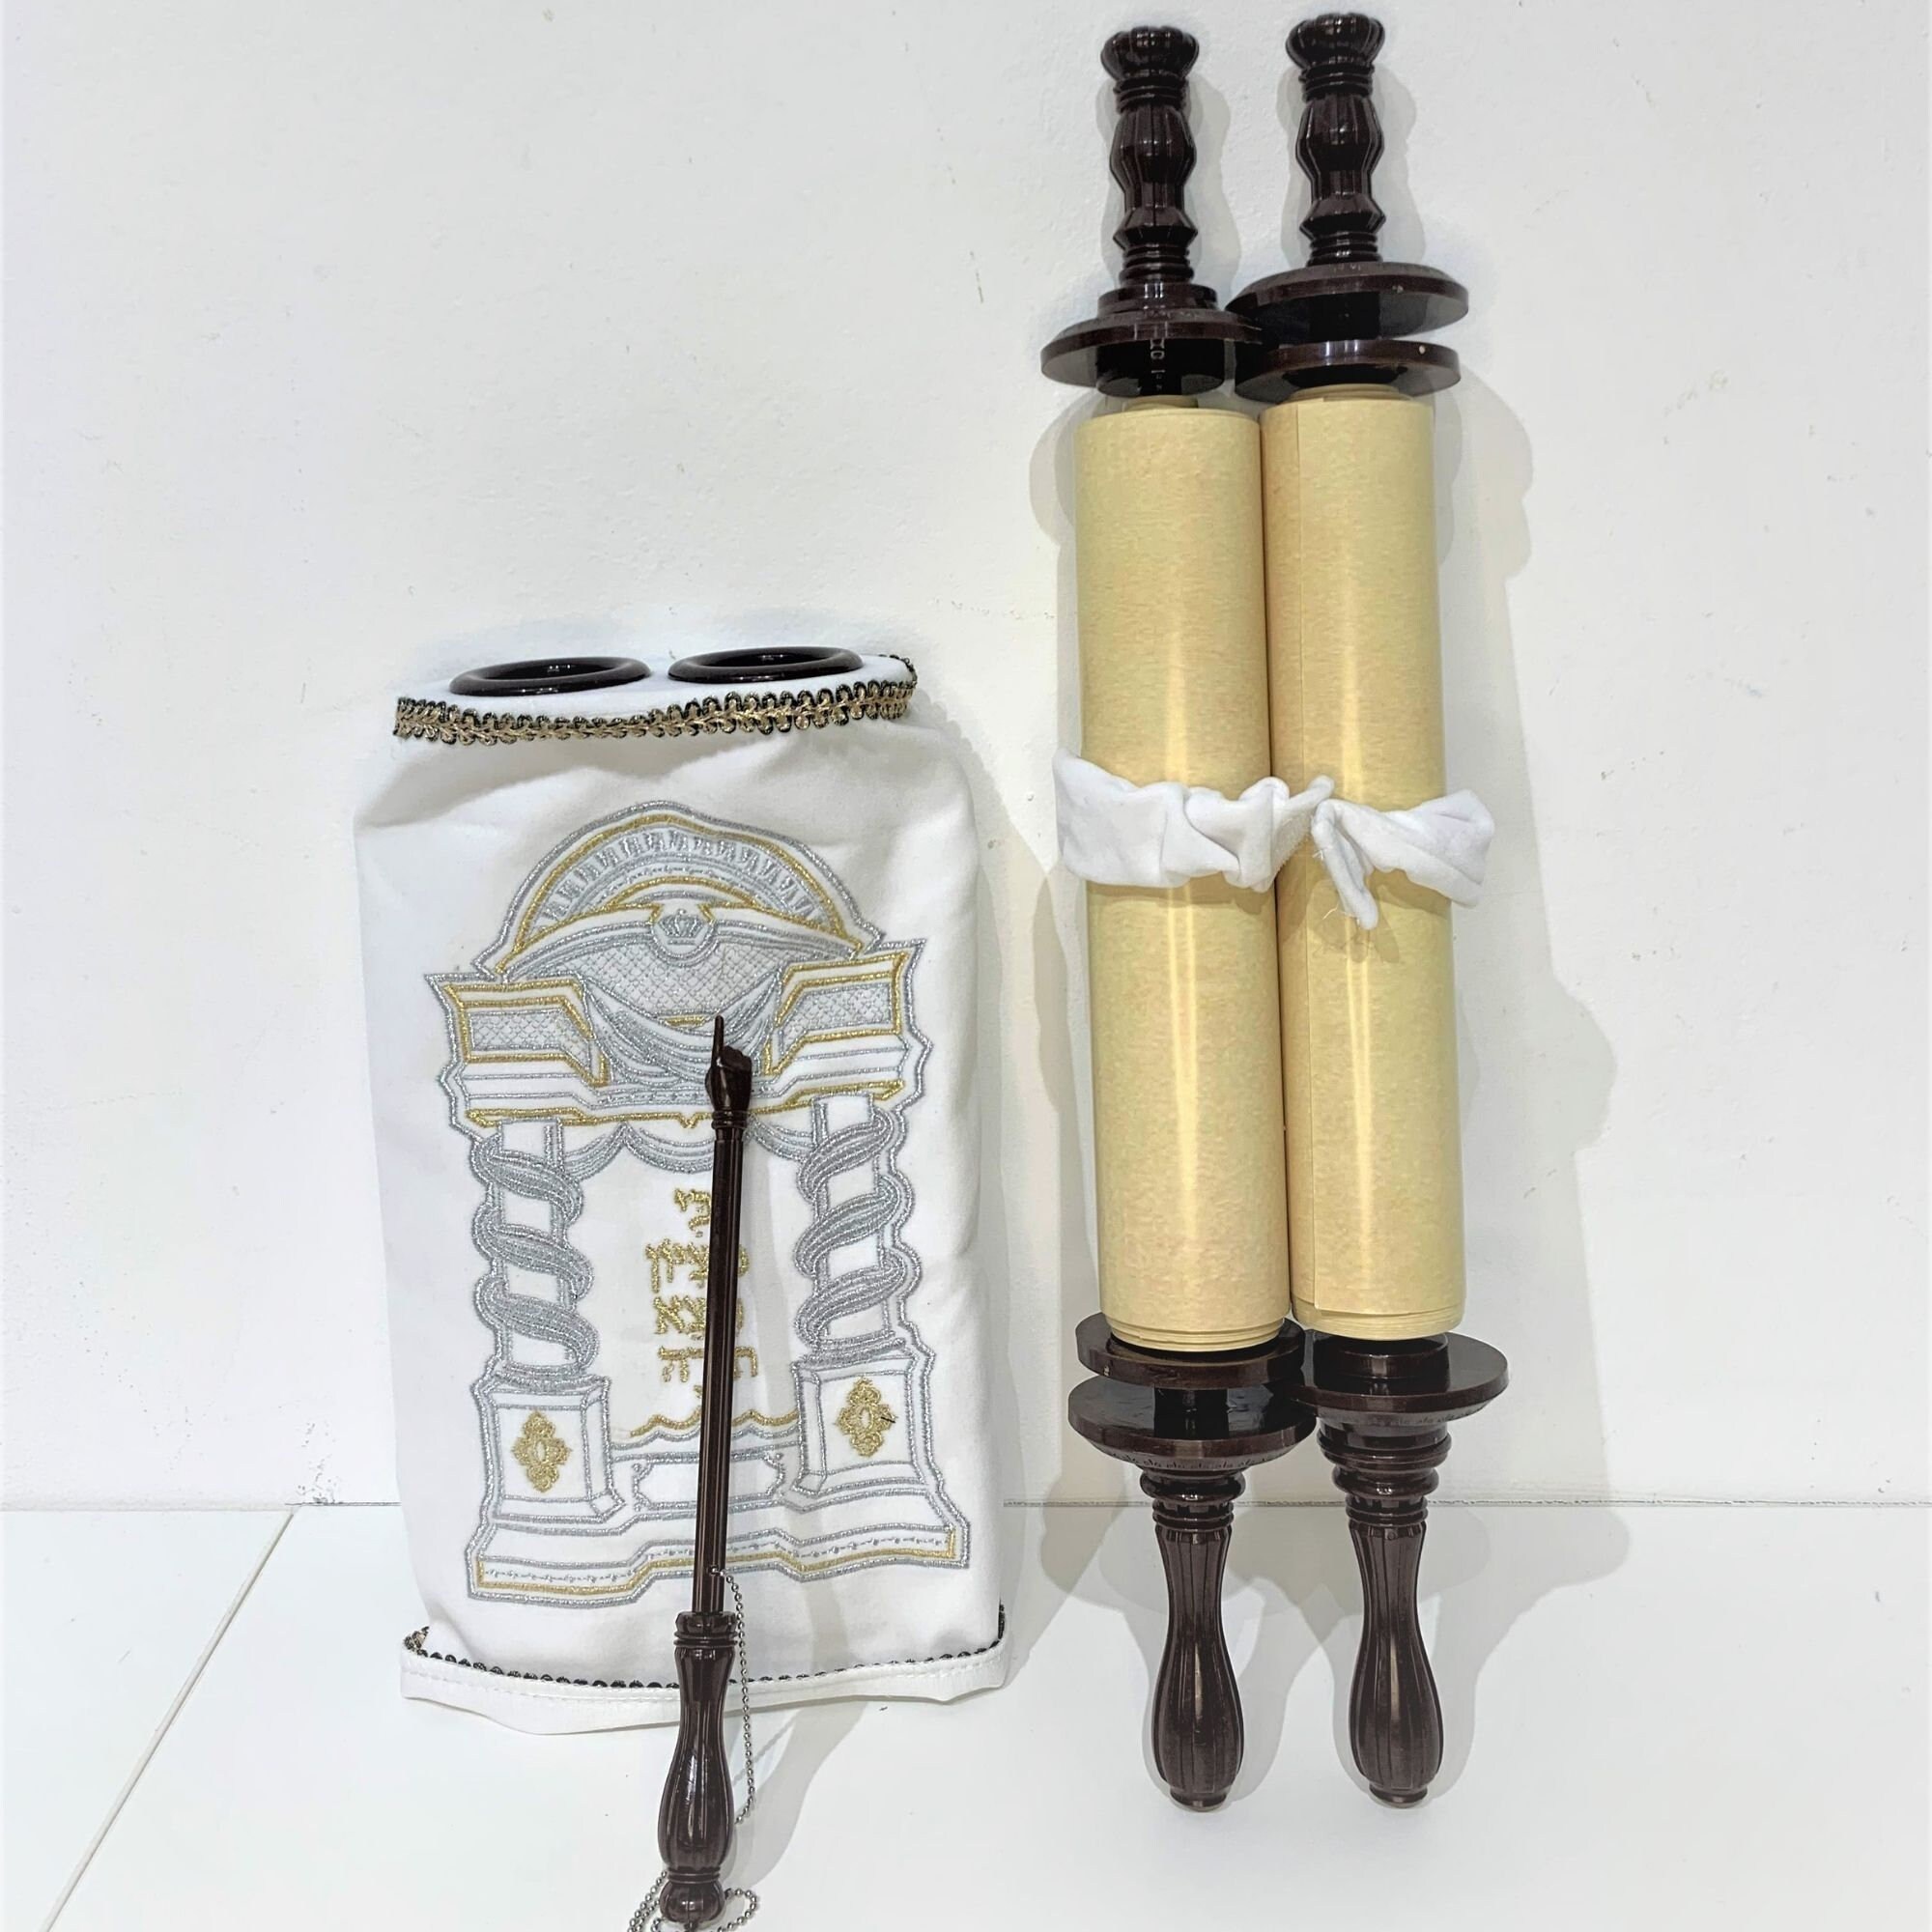 Deluxe Torah Scroll Replica - Small, Jewish Gifts from Israel